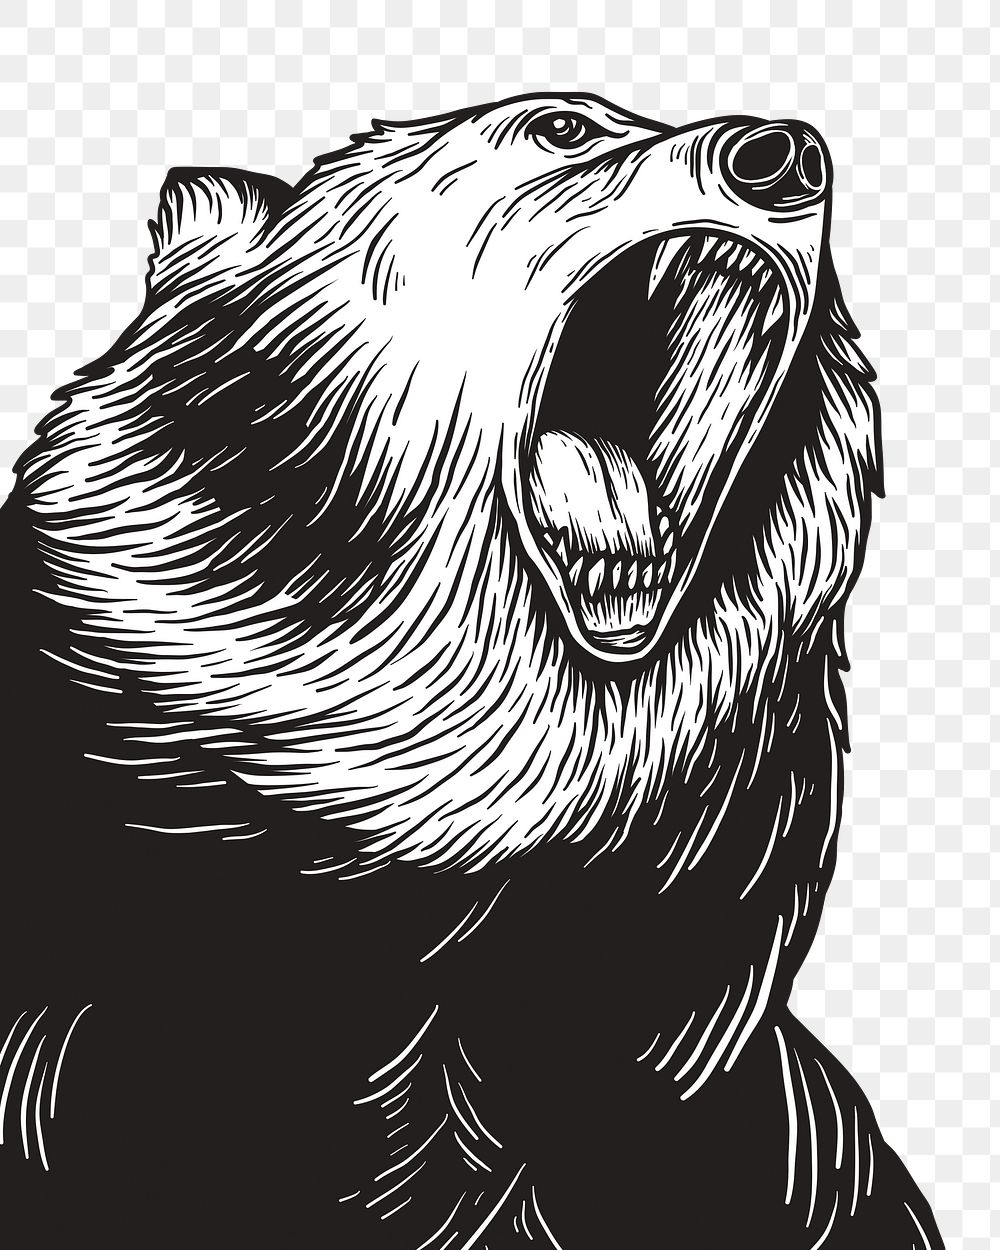 Bear Drawing Images  Free Photos, PNG Stickers, Wallpapers